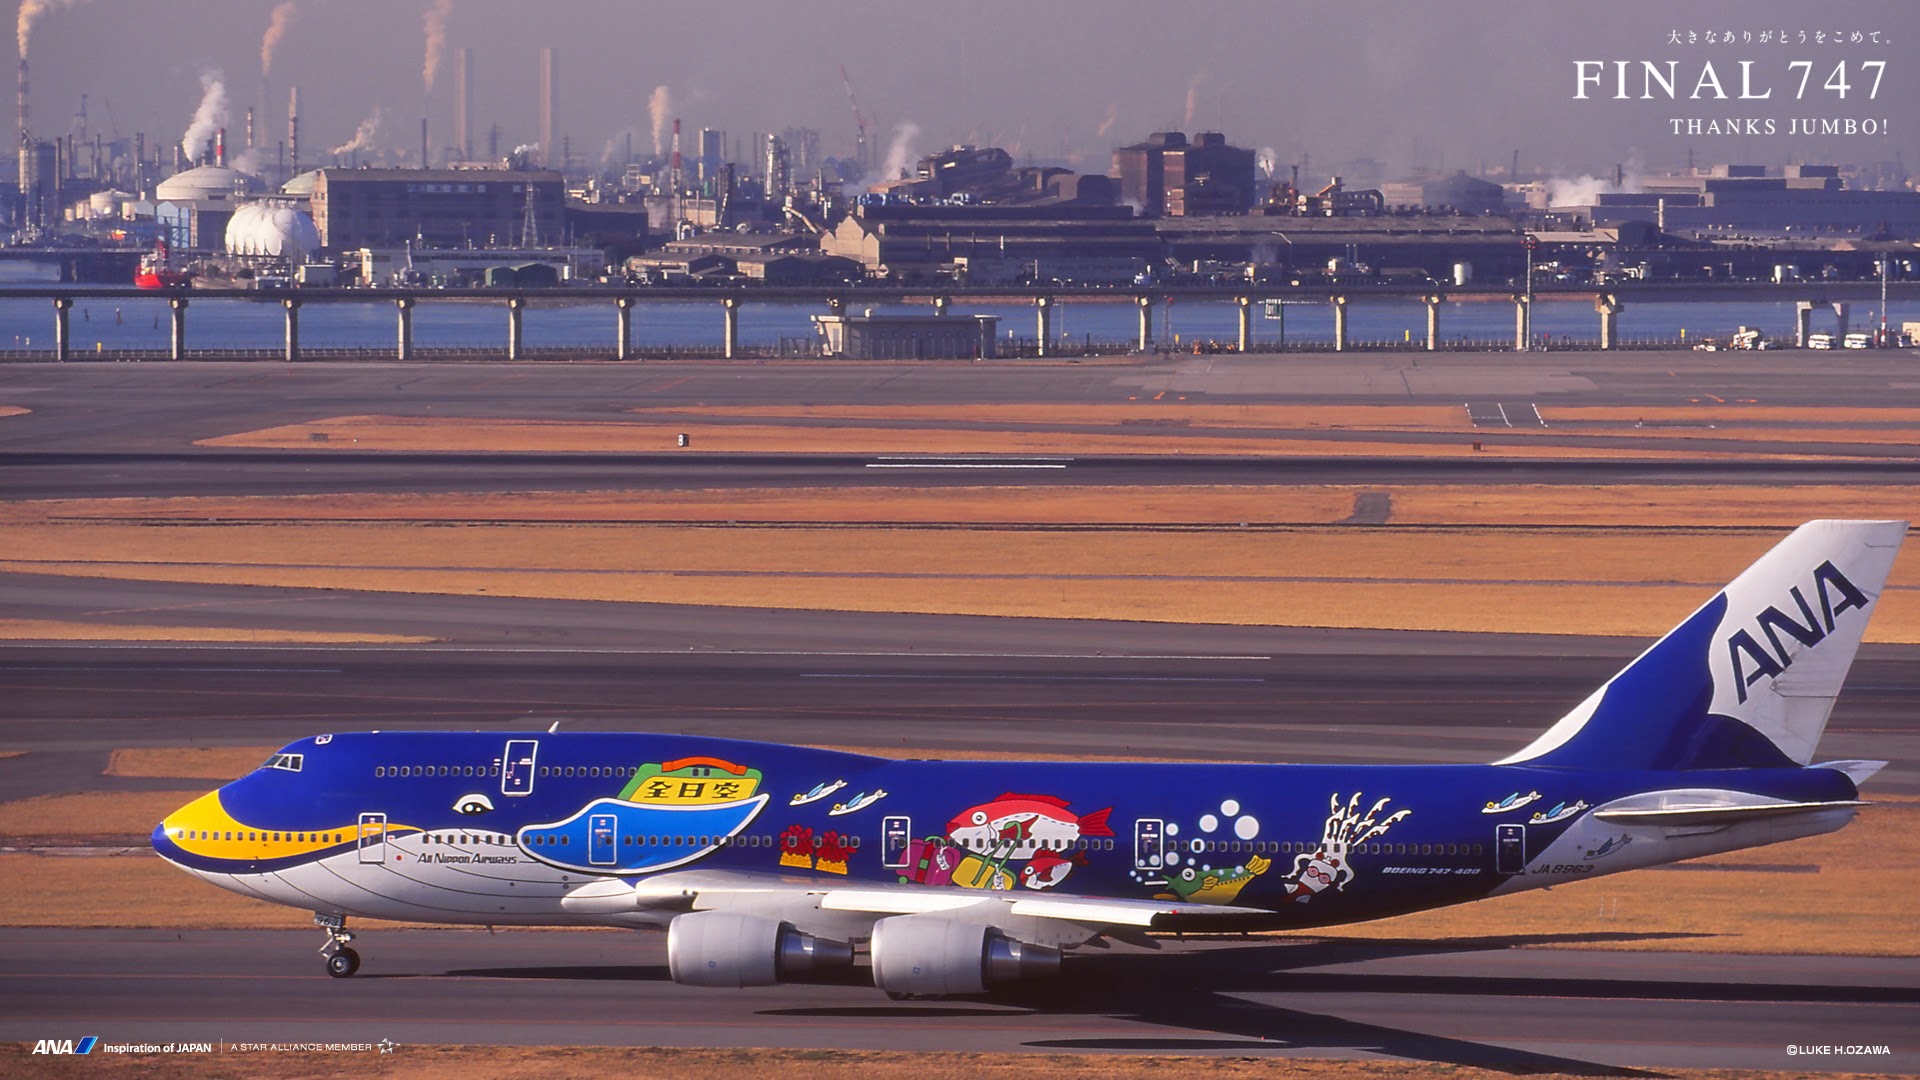 Boeing 747 Wallpaper Gallery Aircraft Nerds - マリン ジャンボ 引退 , HD Wallpaper & Backgrounds